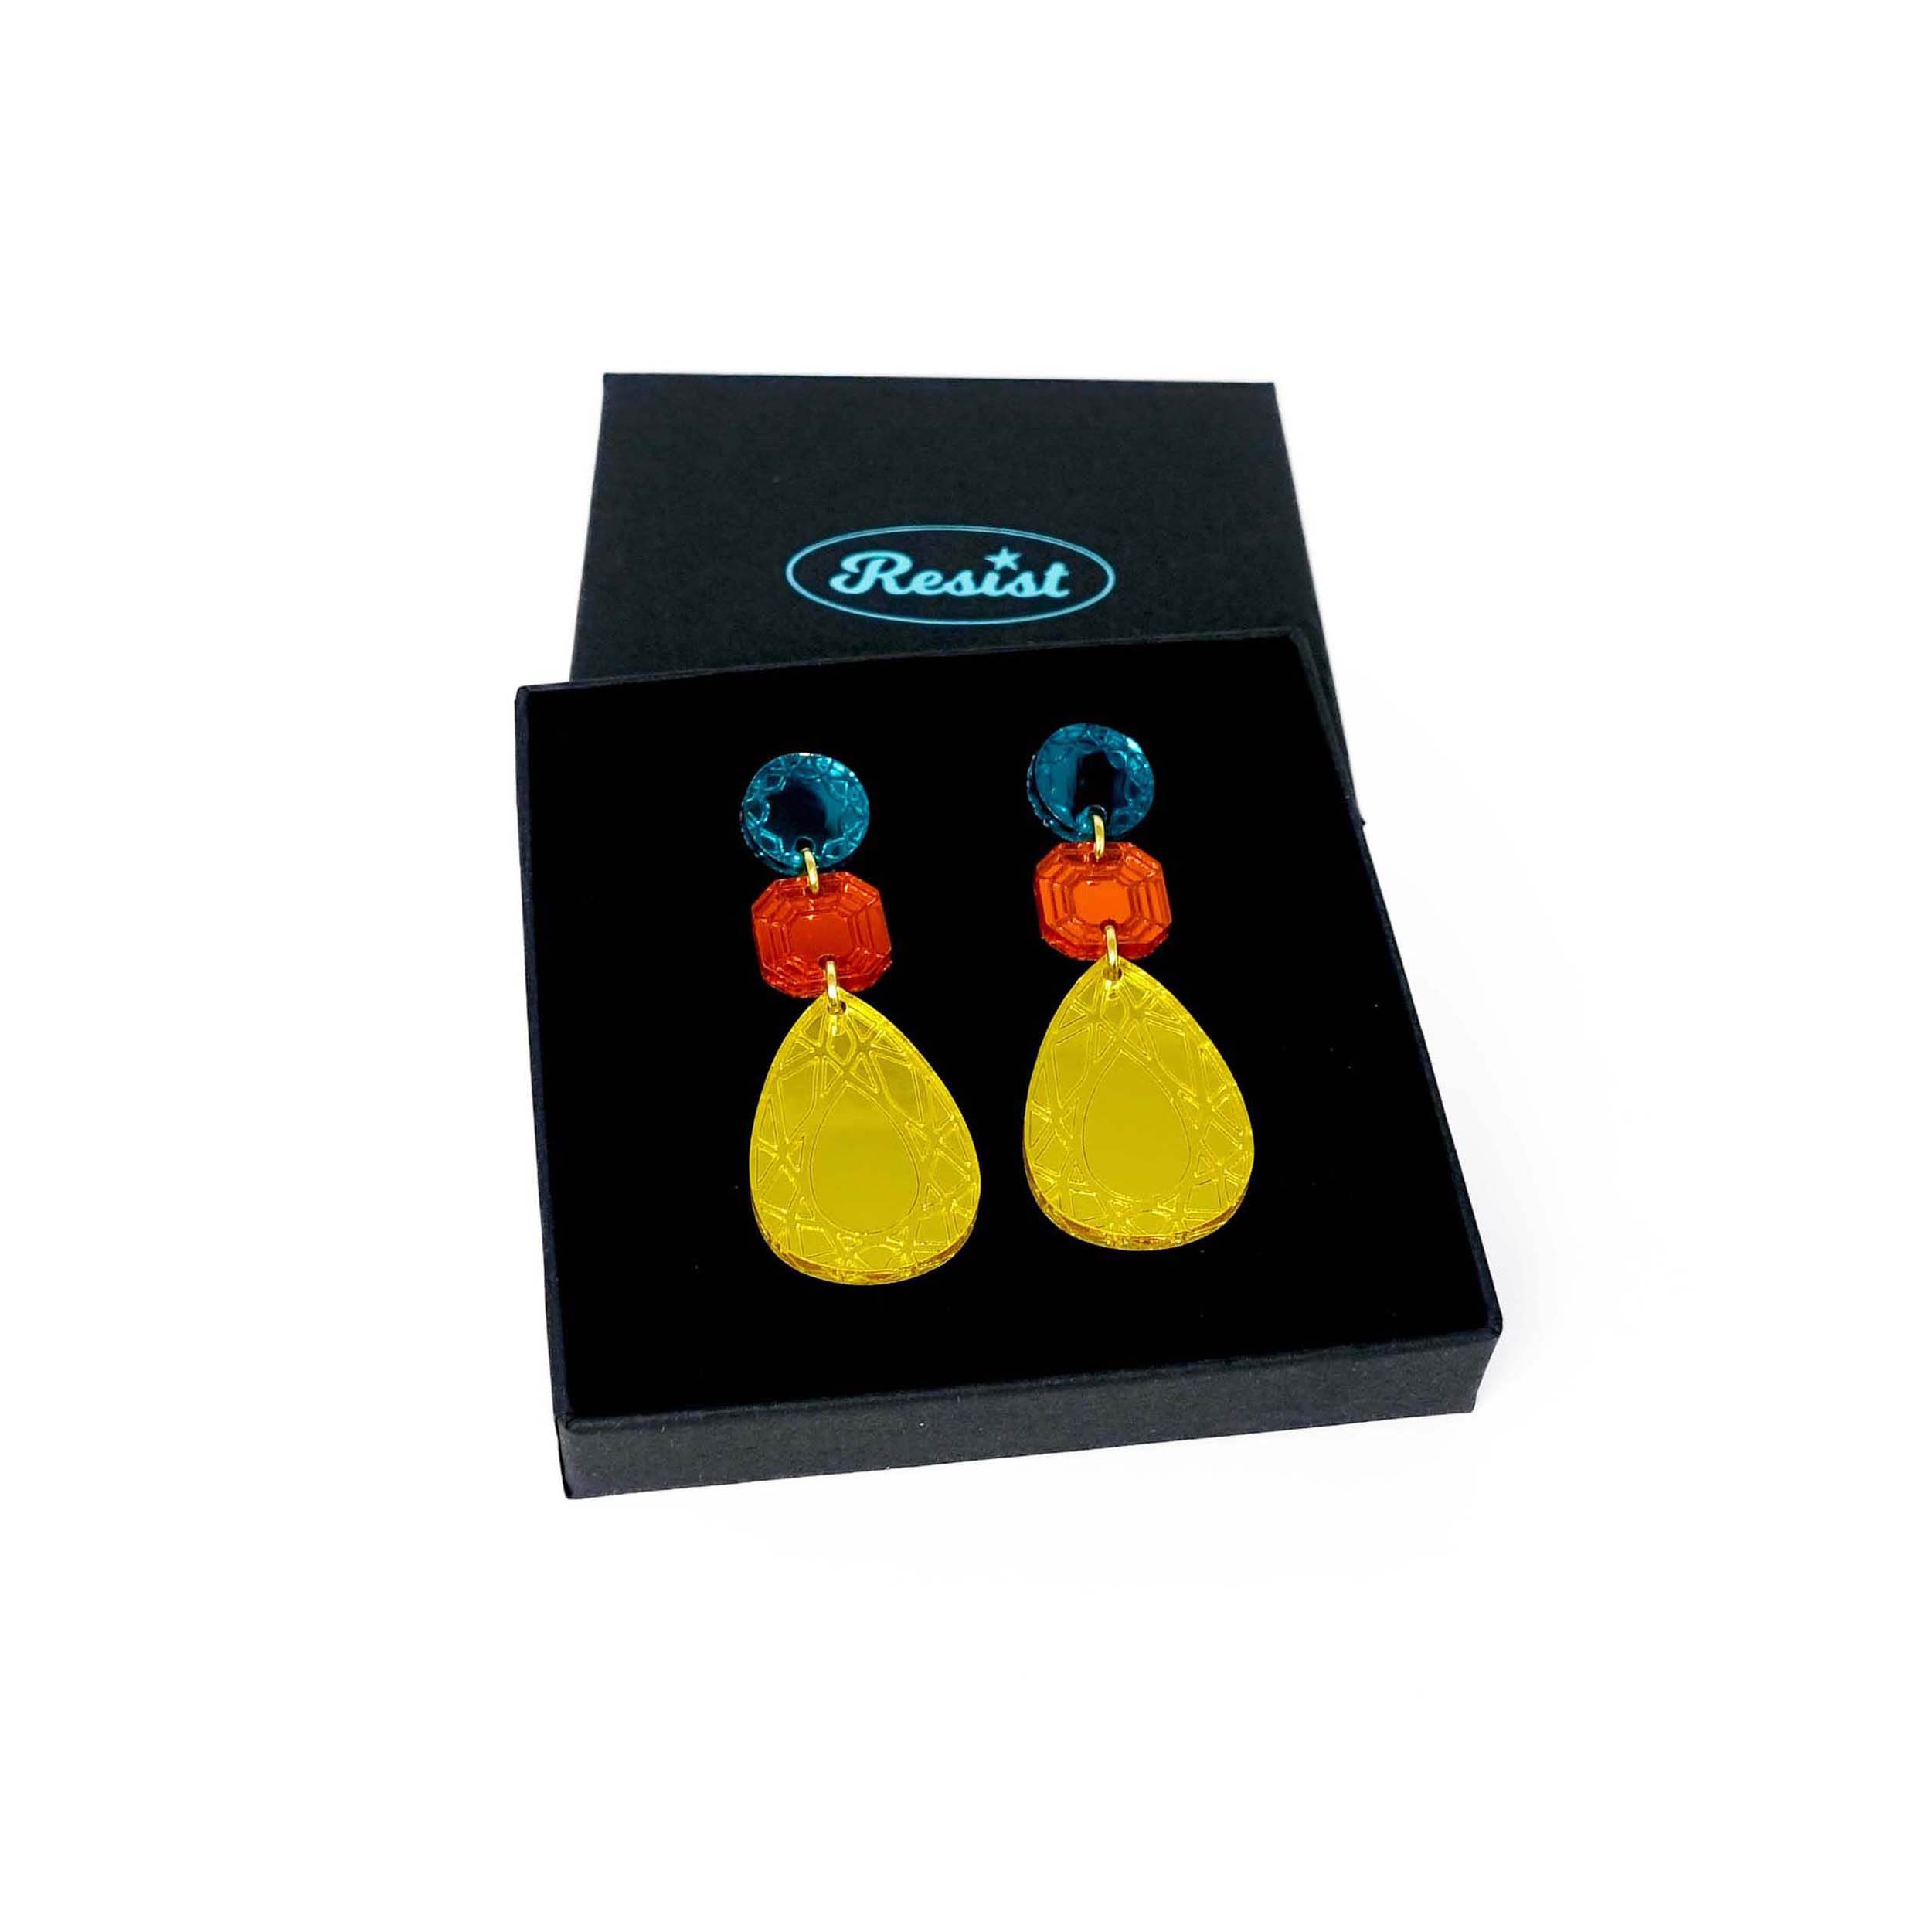 Large Belle Époque Jewel drop earrings in Flame Mambo: yellow, flame and teal colours. Shown in a Wear and Resist gift box. 